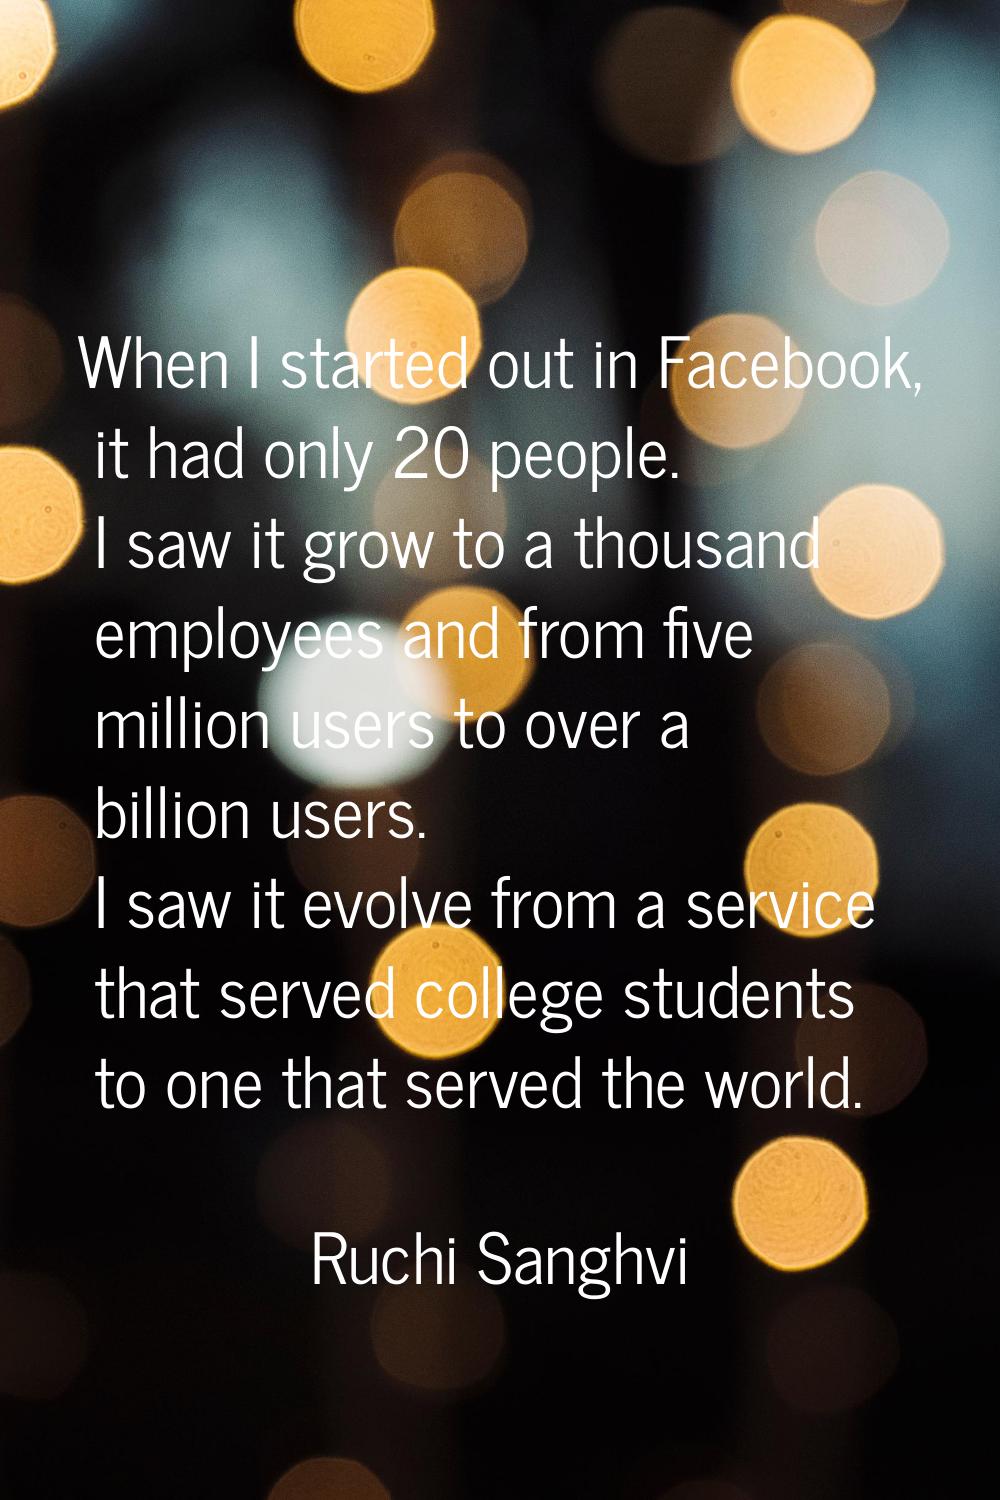 When I started out in Facebook, it had only 20 people. I saw it grow to a thousand employees and fr